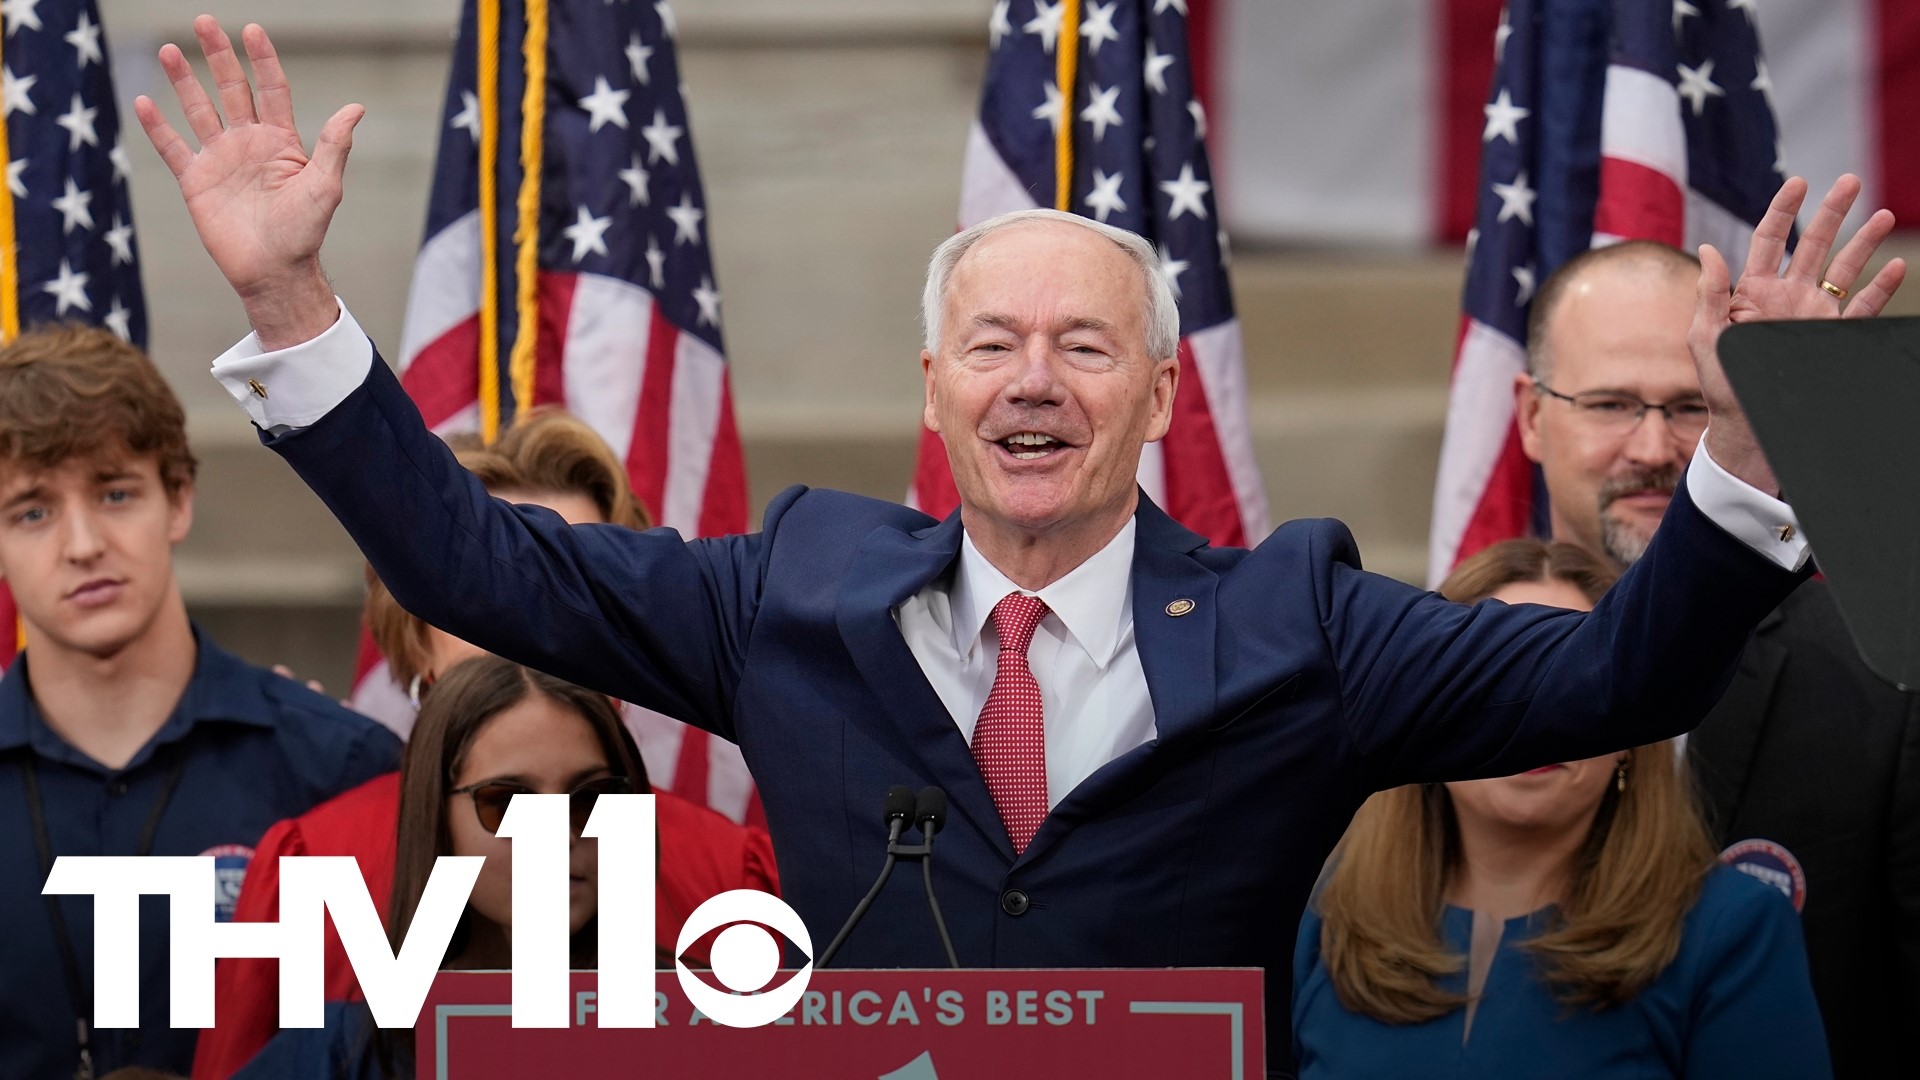 The former two-term governor of Arkansas pledged to be a leader who “will bring out the best of America” and says he stands alone in terms of his experience.